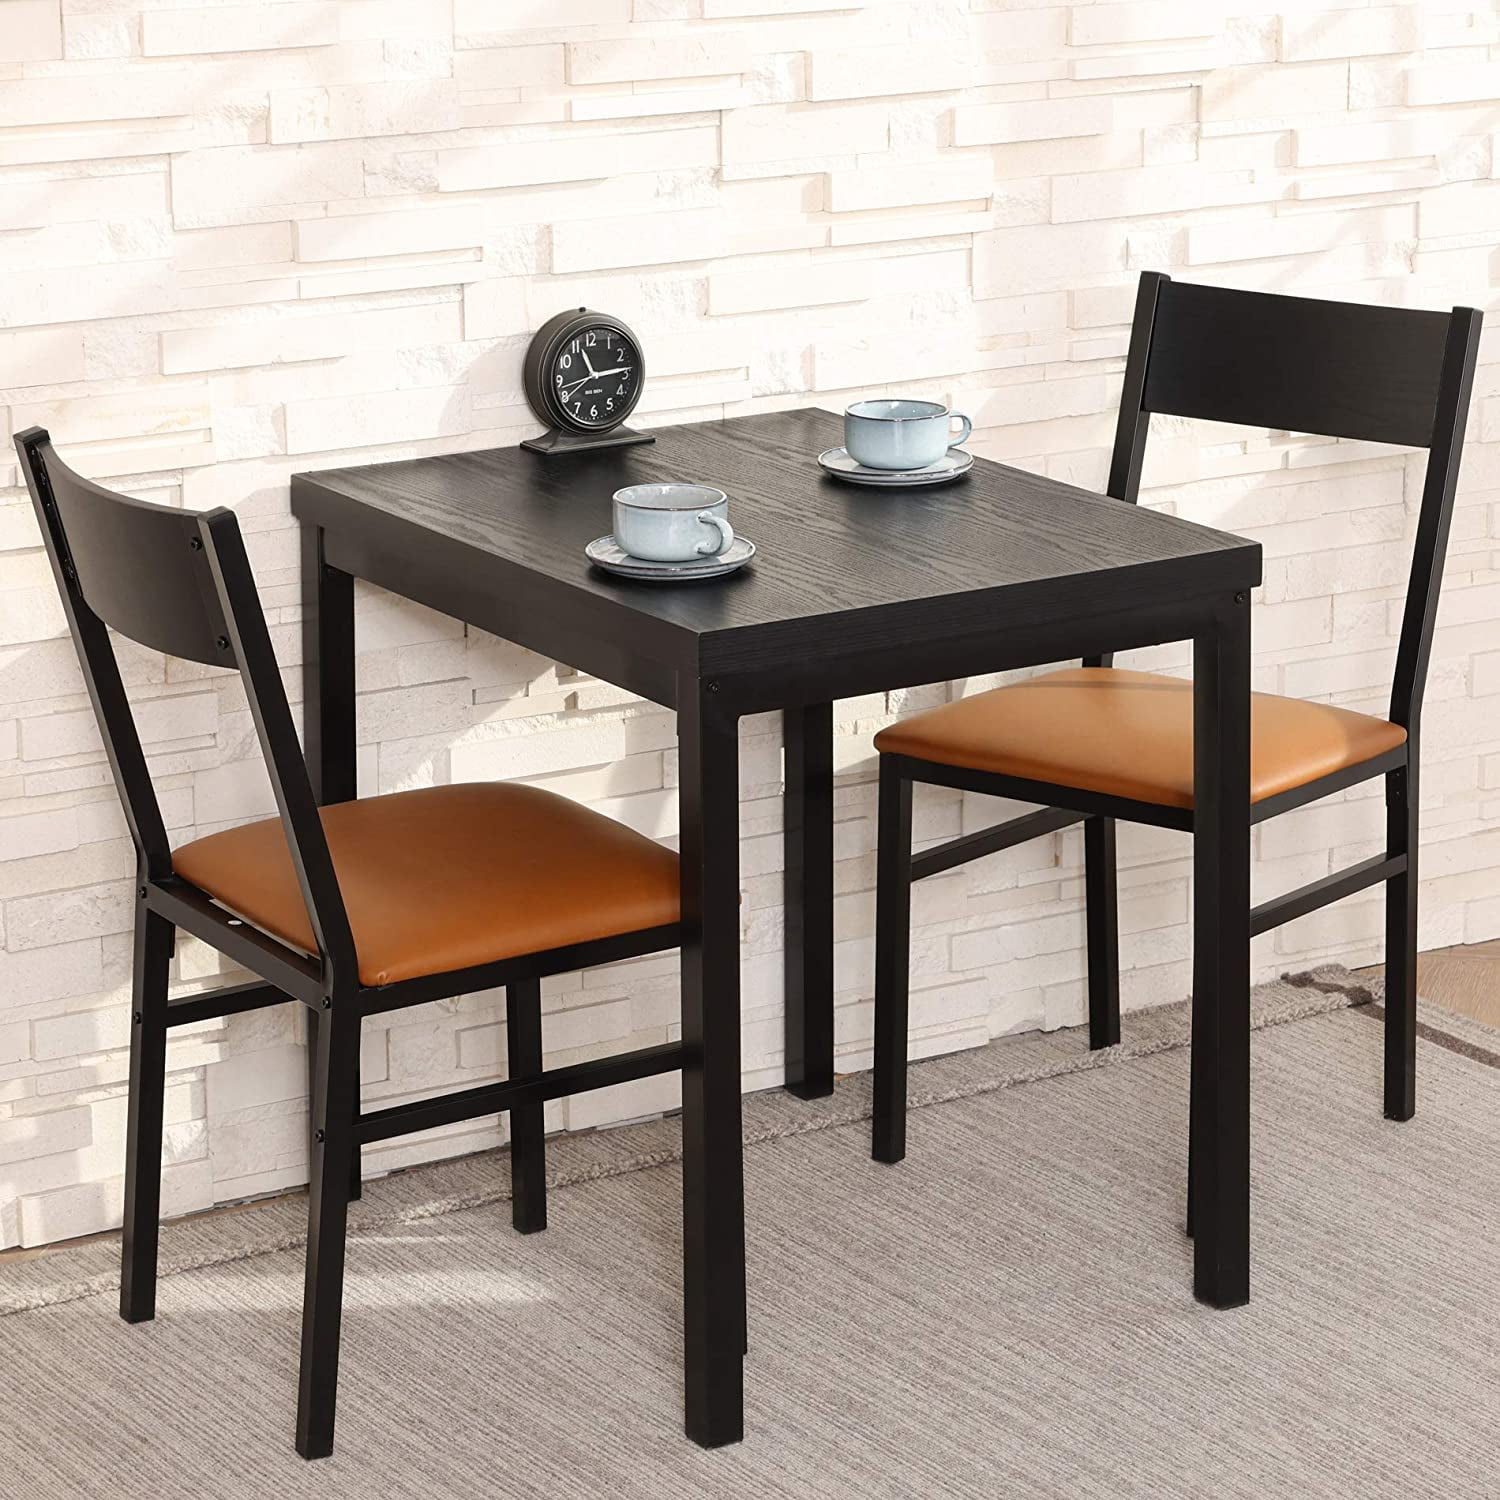 FITUEYES 3 Piece Dining Table Set of 2 with Cushioned Chairs, Black and ...